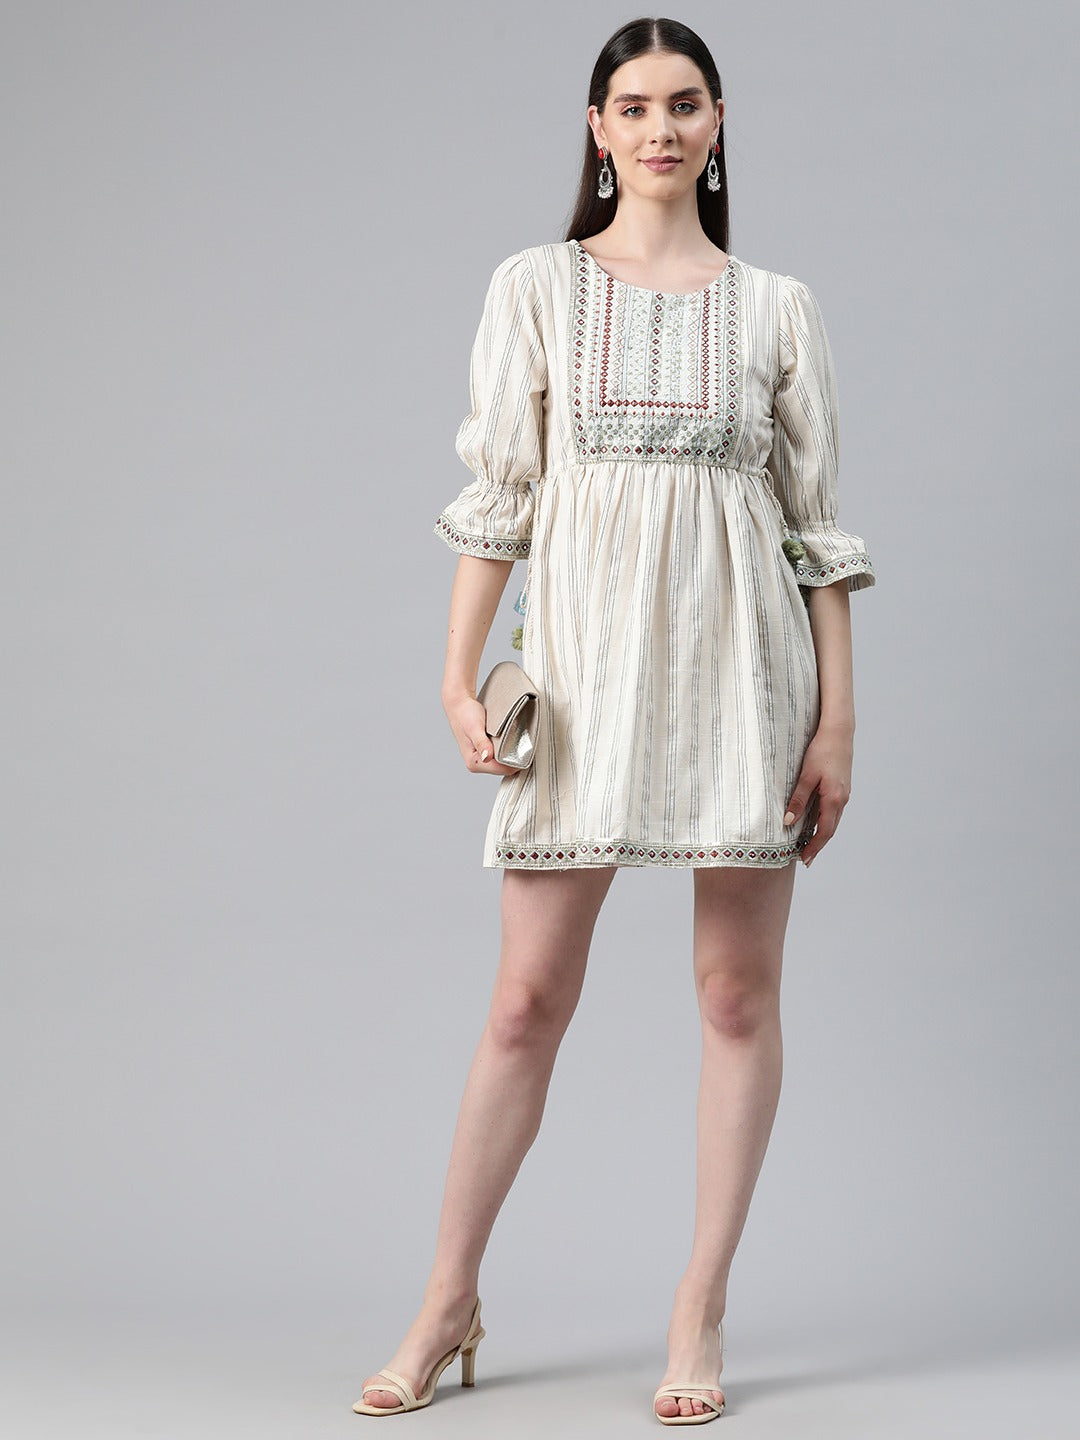 Off White Color Cotton Fabric Tiered Dress